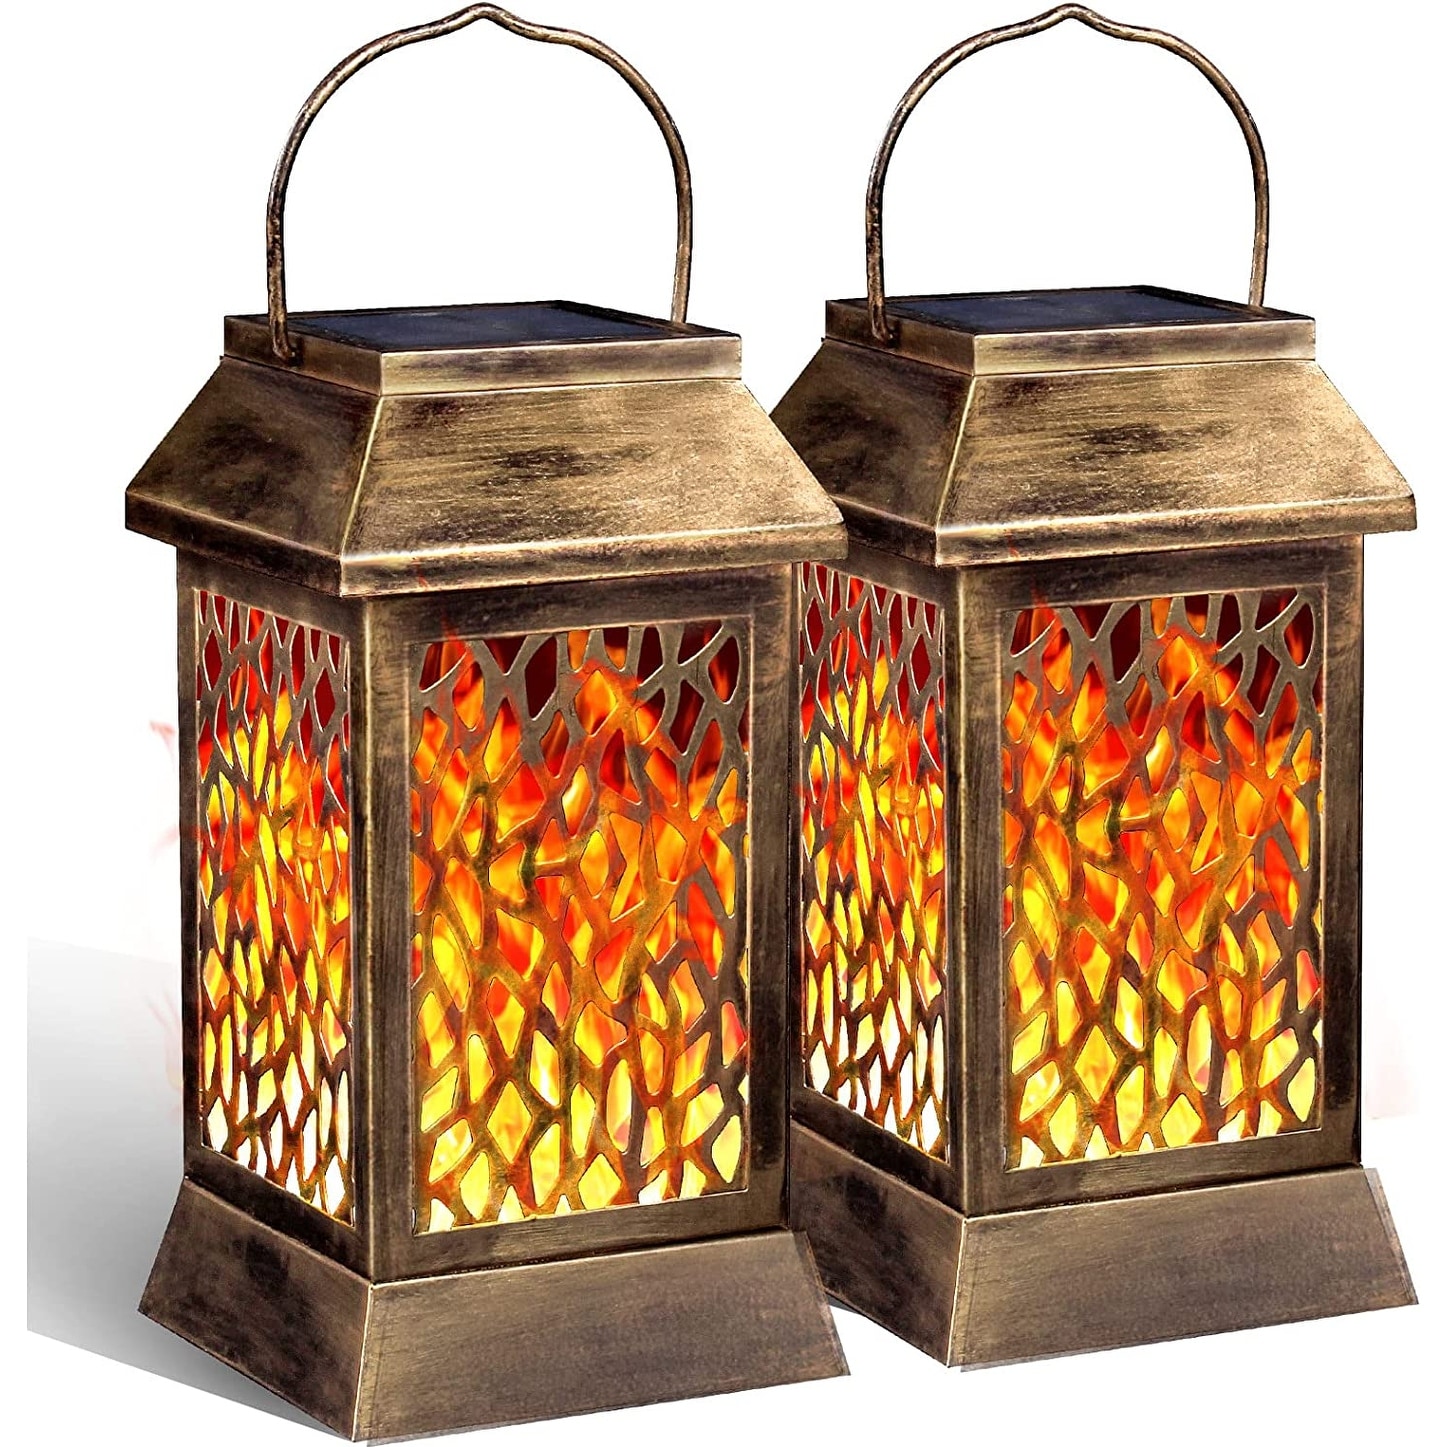 WaLensee Solar Lights Outdoor With Flickering Flame Upgraded Metal Solar  Powered Lanterns Landscape Decoration (Set of 2) Bed Bath  Beyond  37920417